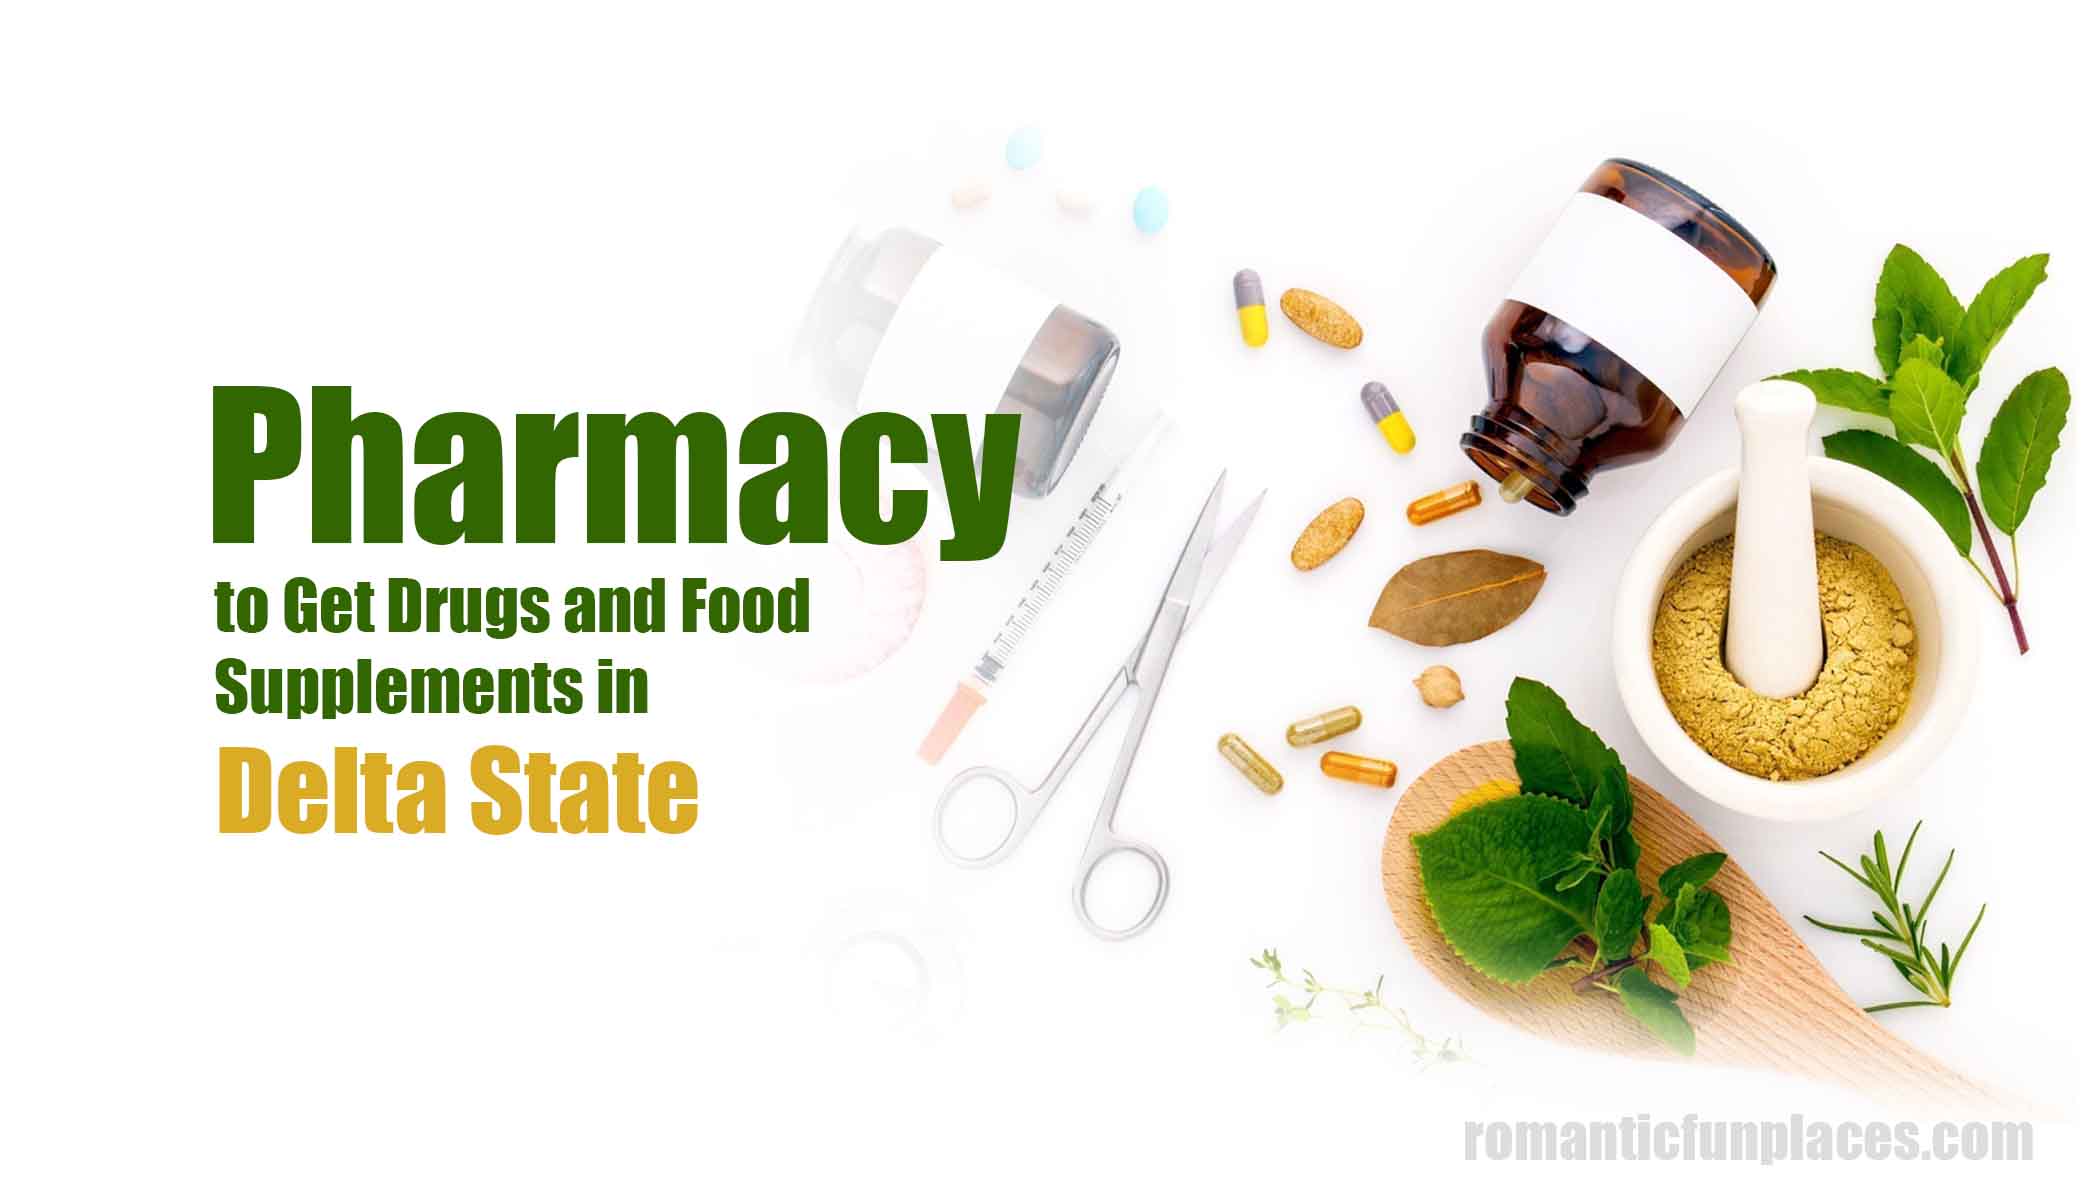 Pharmacy to Get Drugs and Food Supplements in Delta State